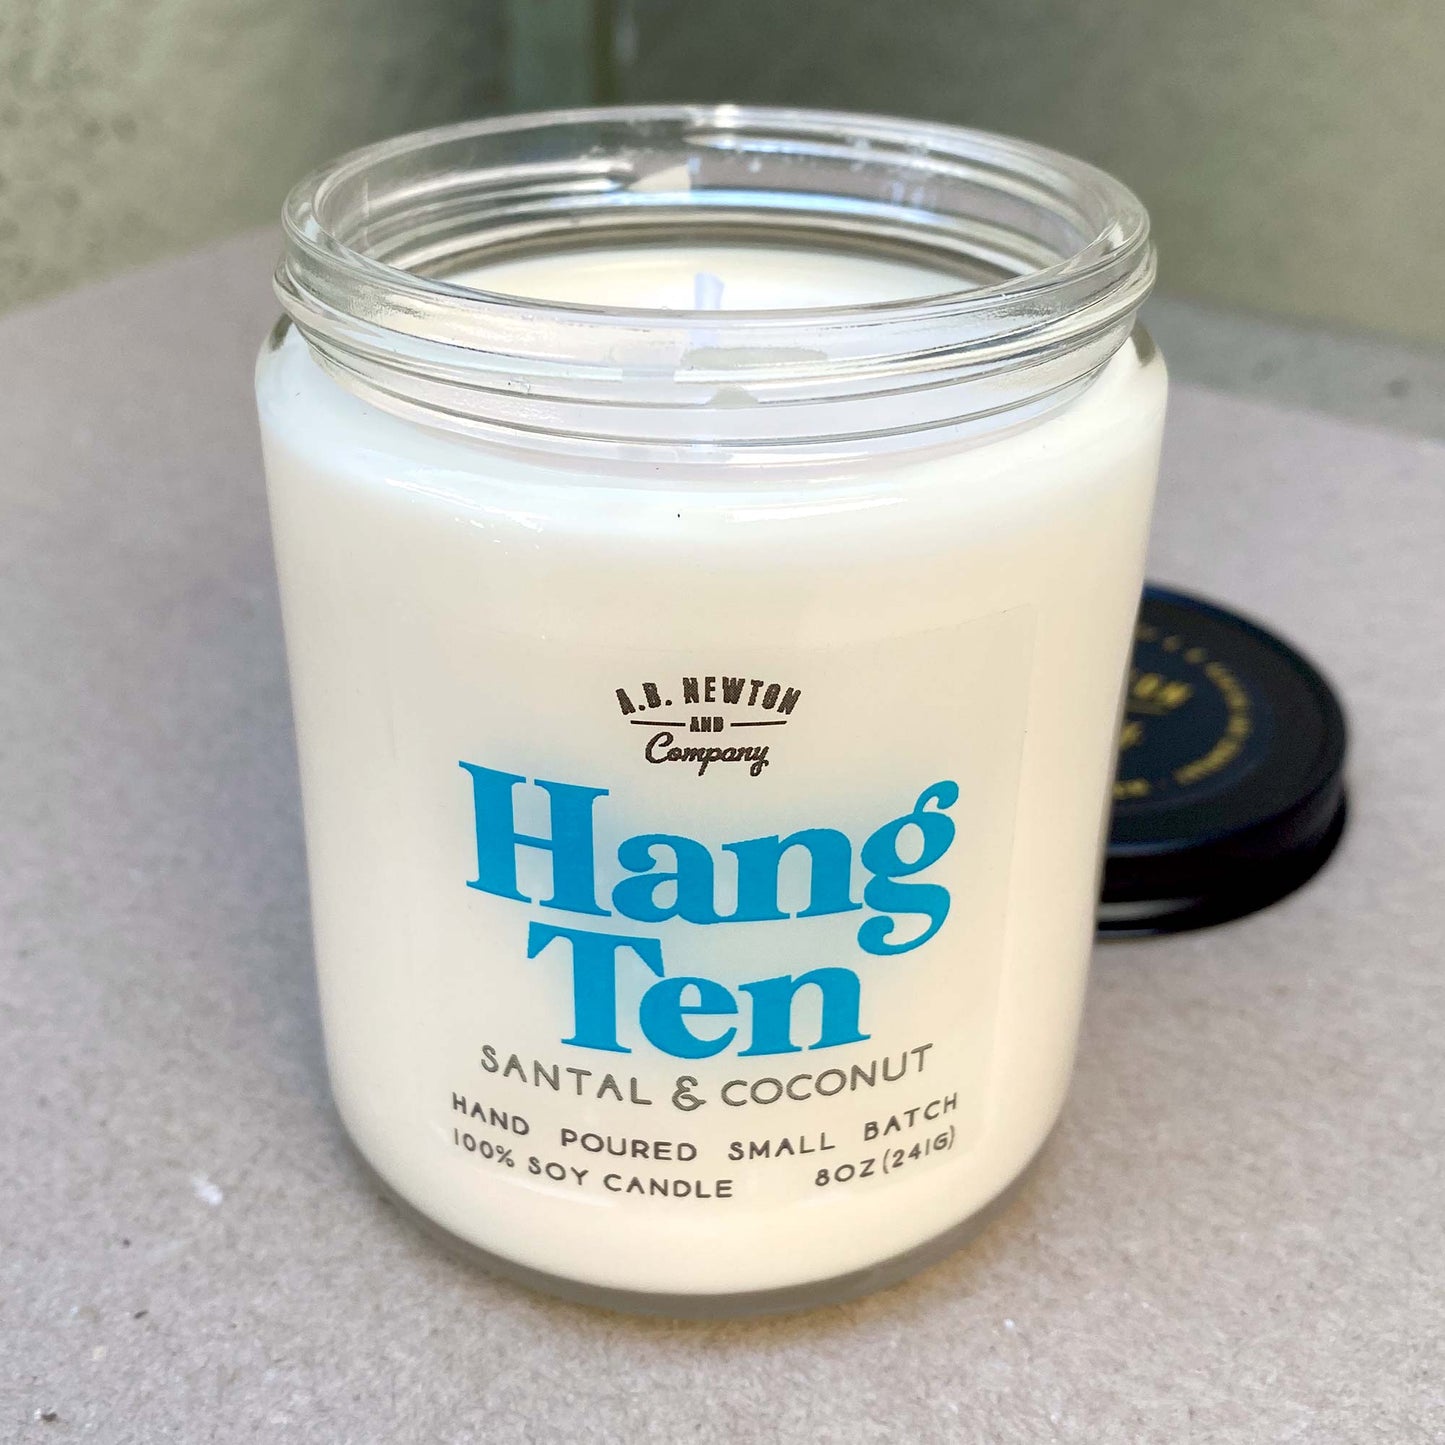 Hang Ten Surf Wax Inspired Coconut Scented 8oz Soy Candle Hand Poured Small Batch - A. B. Newton and Company